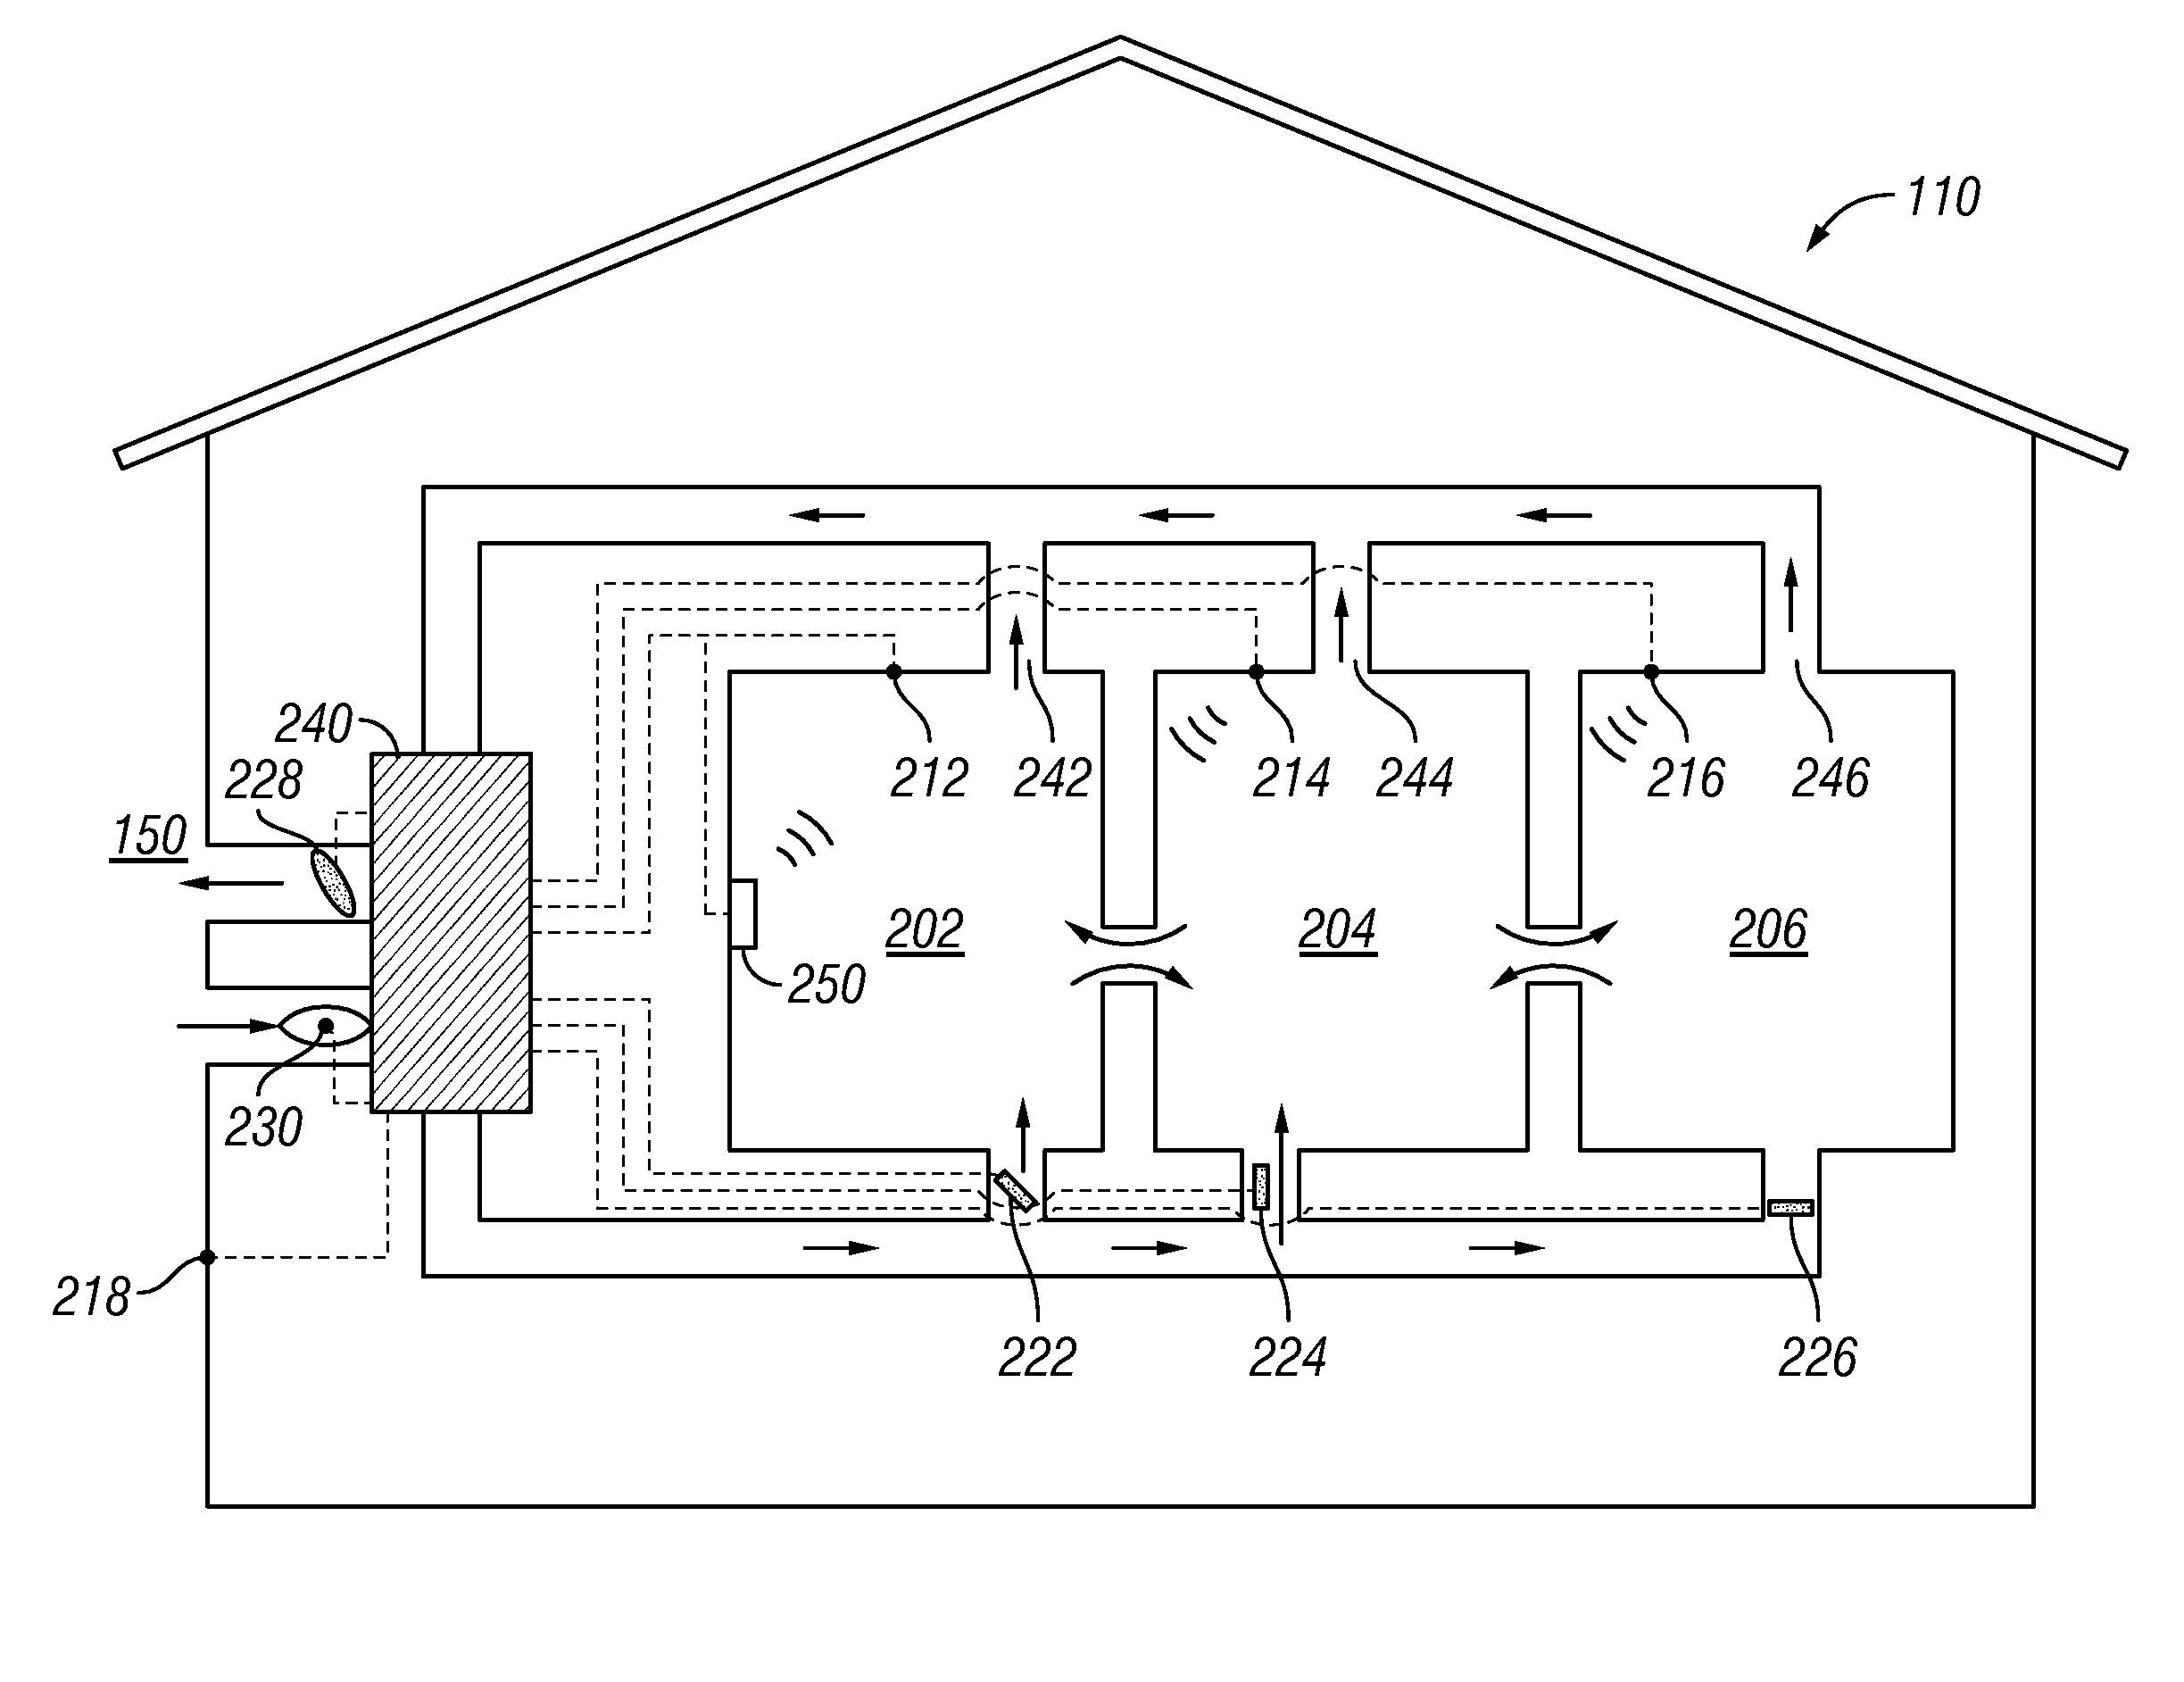 Method for controlling multiple indoor air quality parameters